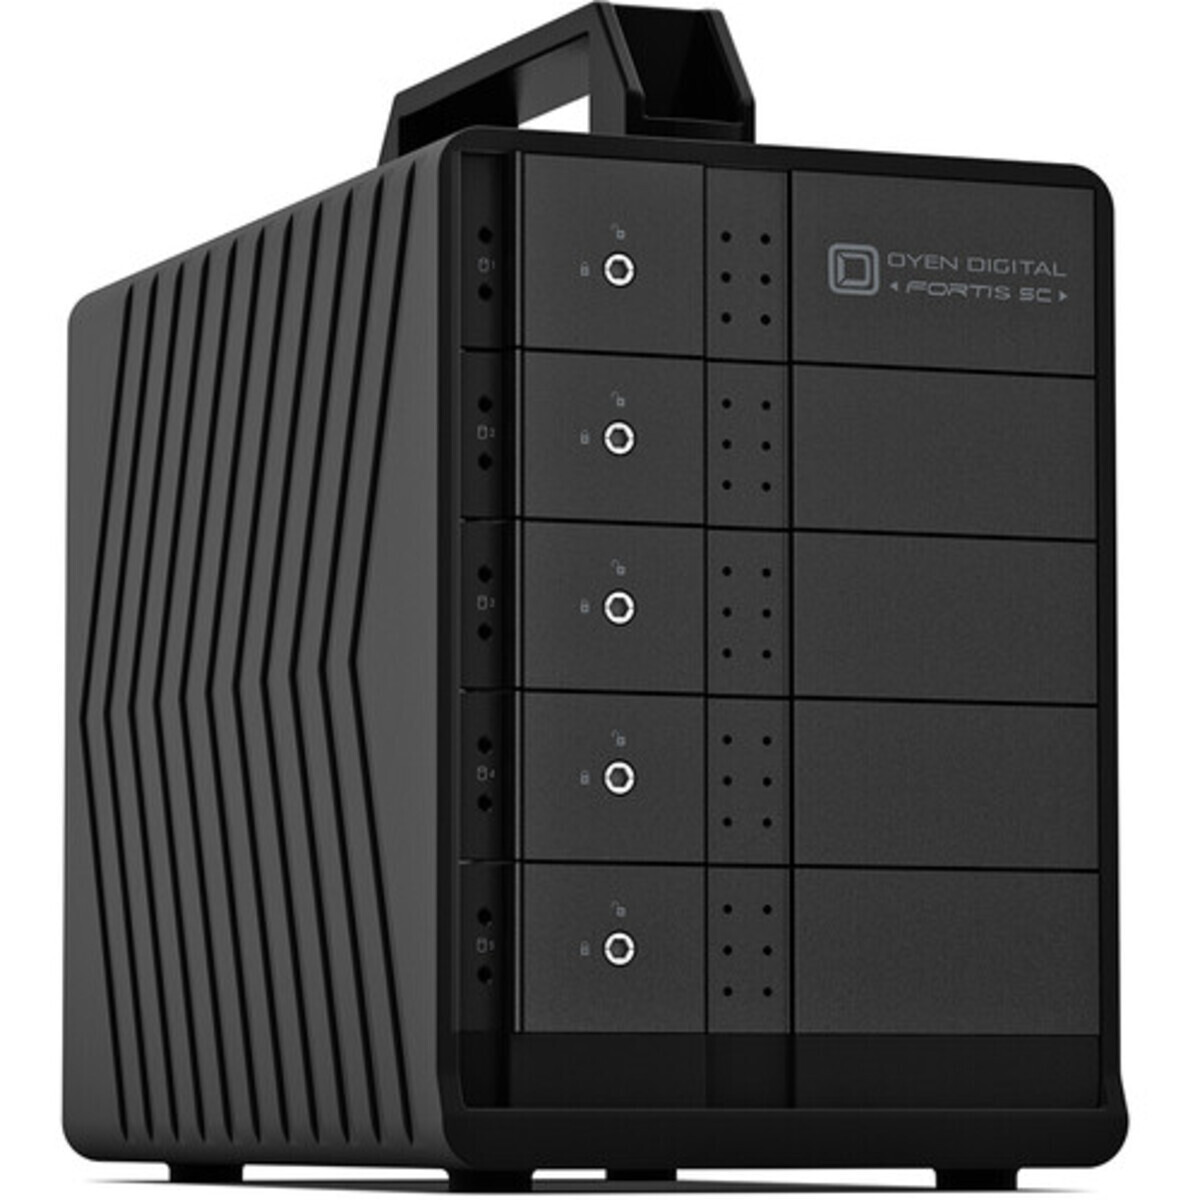 OYEN Fortis 5C Desktop 5-Bay Multimedia / Power User / Business DAS - Direct Attached Storage Device Burn-In Tested Configurations Fortis 5C